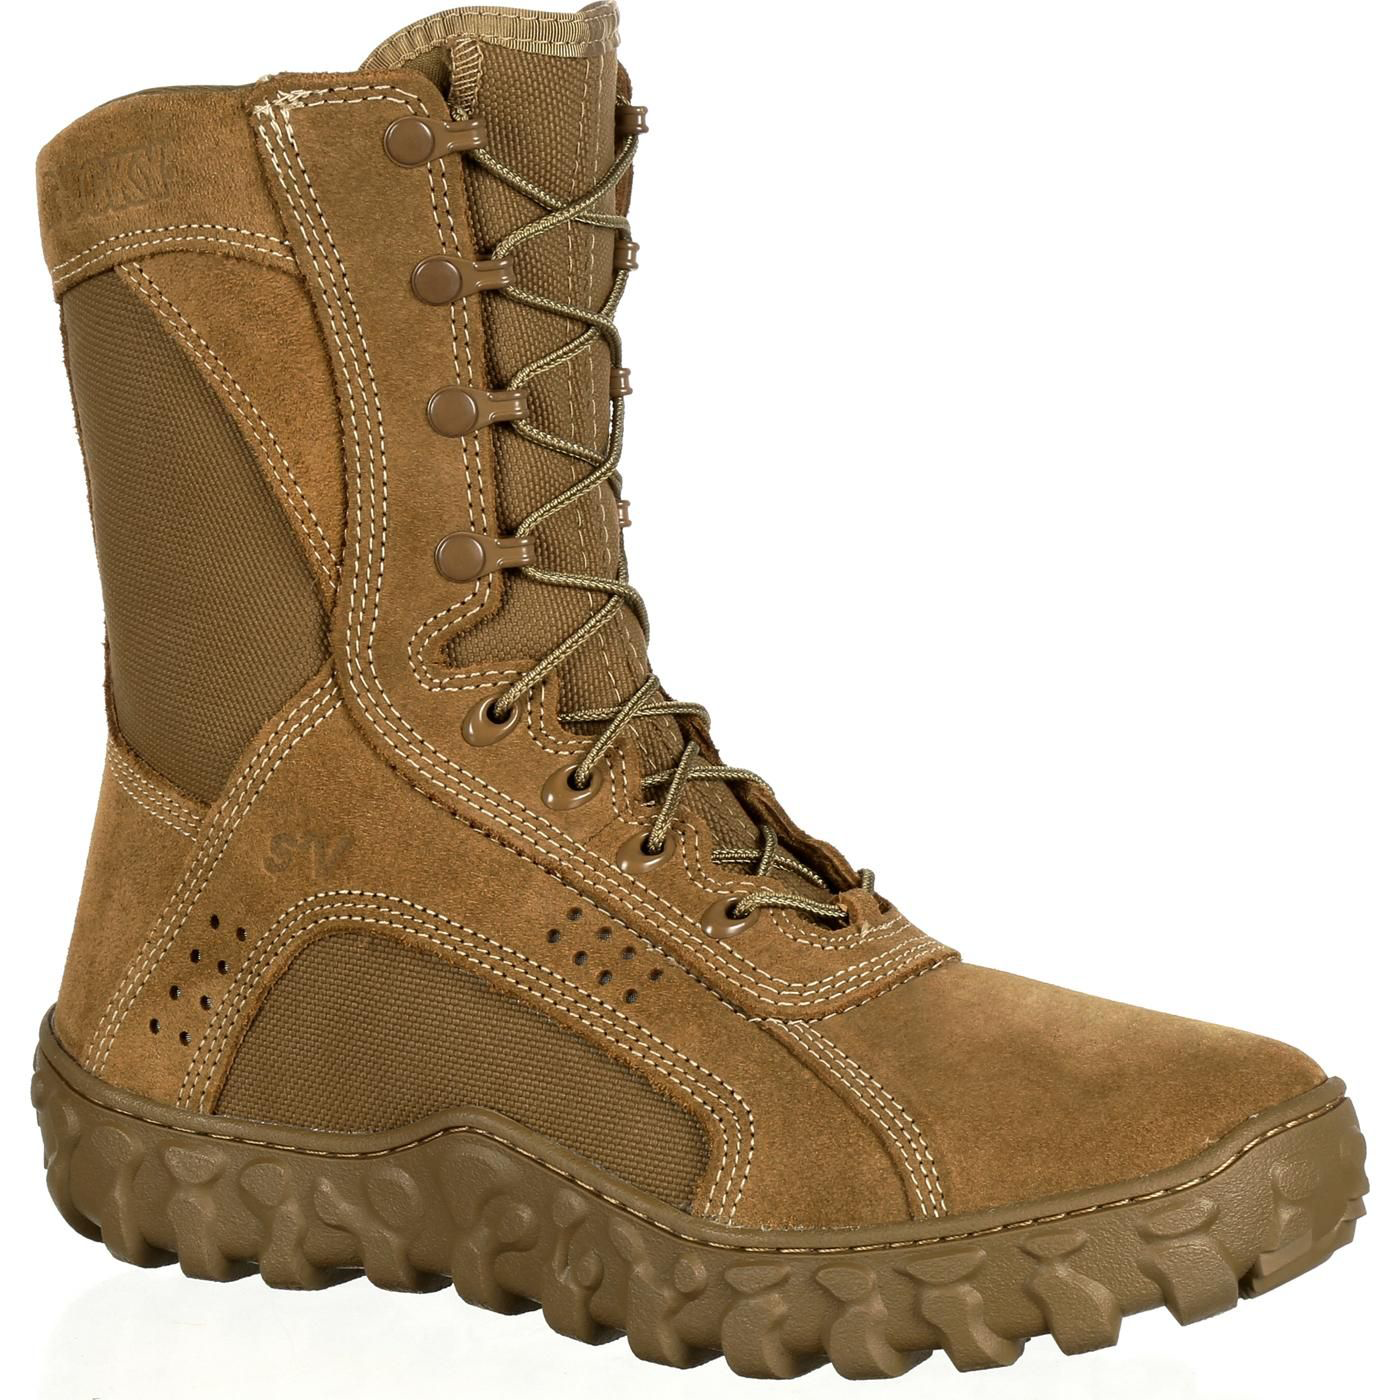 Rocky S2V Tactical Military Boots for Men - Coyote Brown - 7M